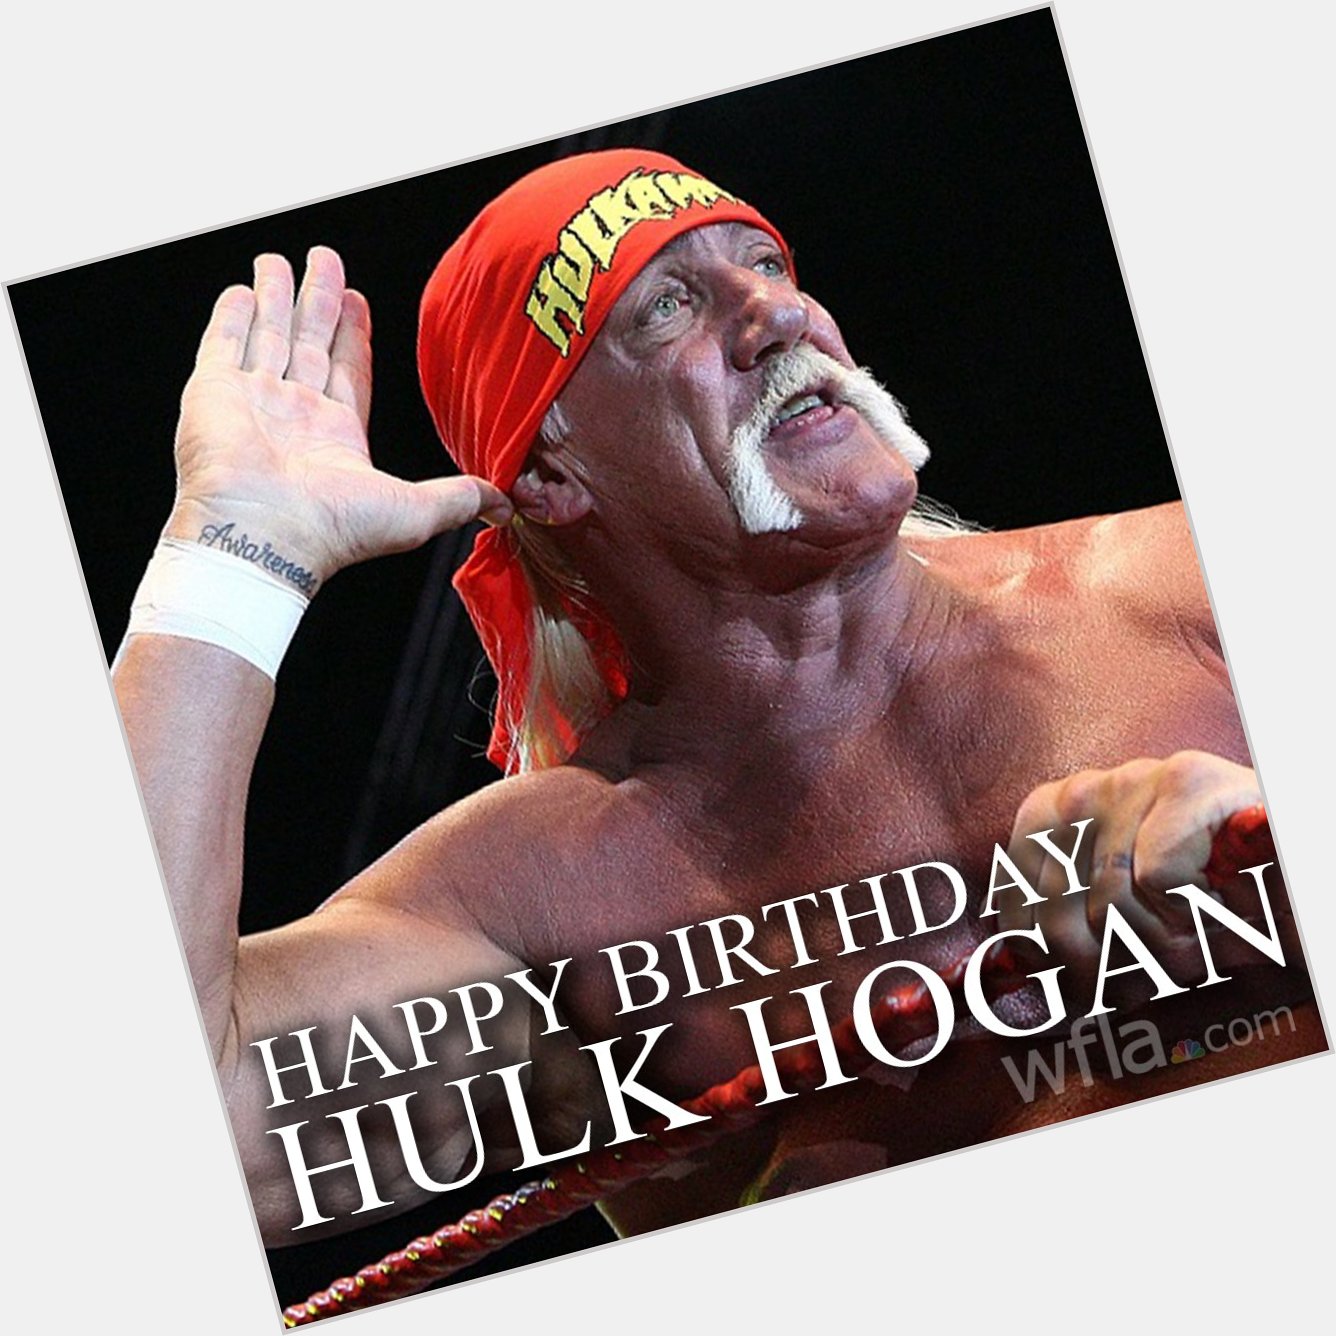 HAPPY BIRTHDAY BROTHER: Happy Birthday to the one and only Hulk Hogan!!!  